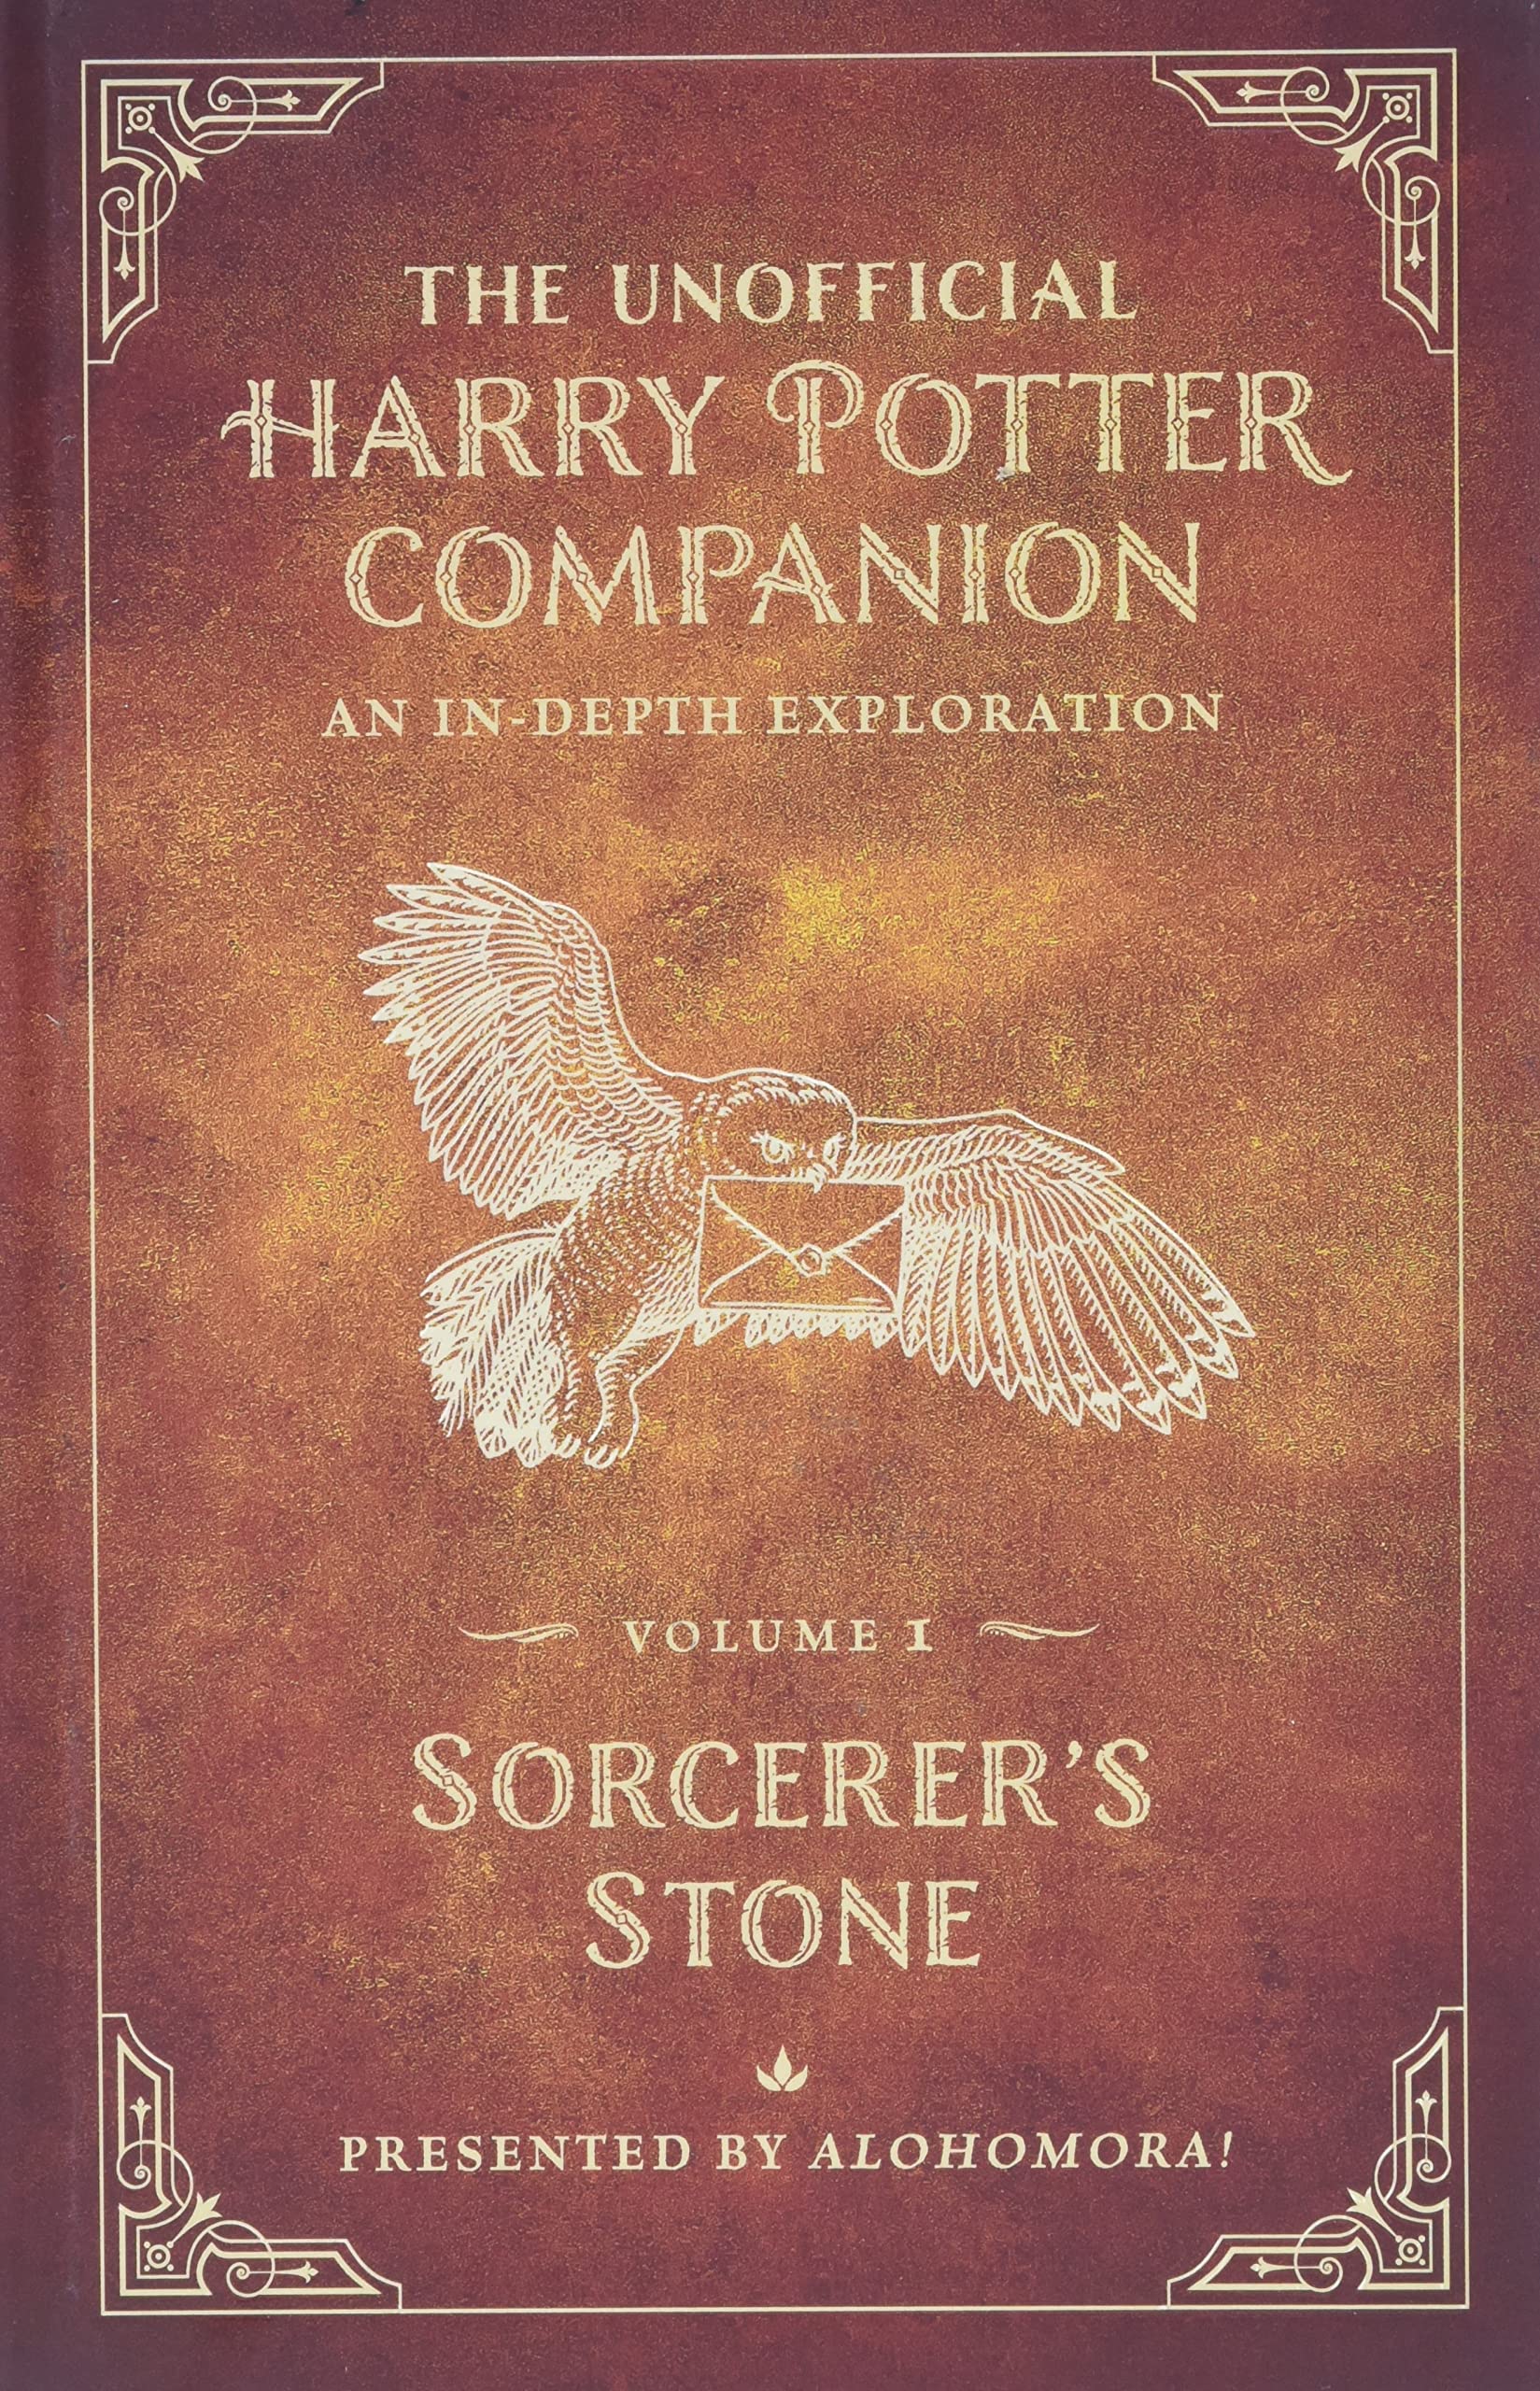 The Unofficial Harry Potter Companion - Volume 1